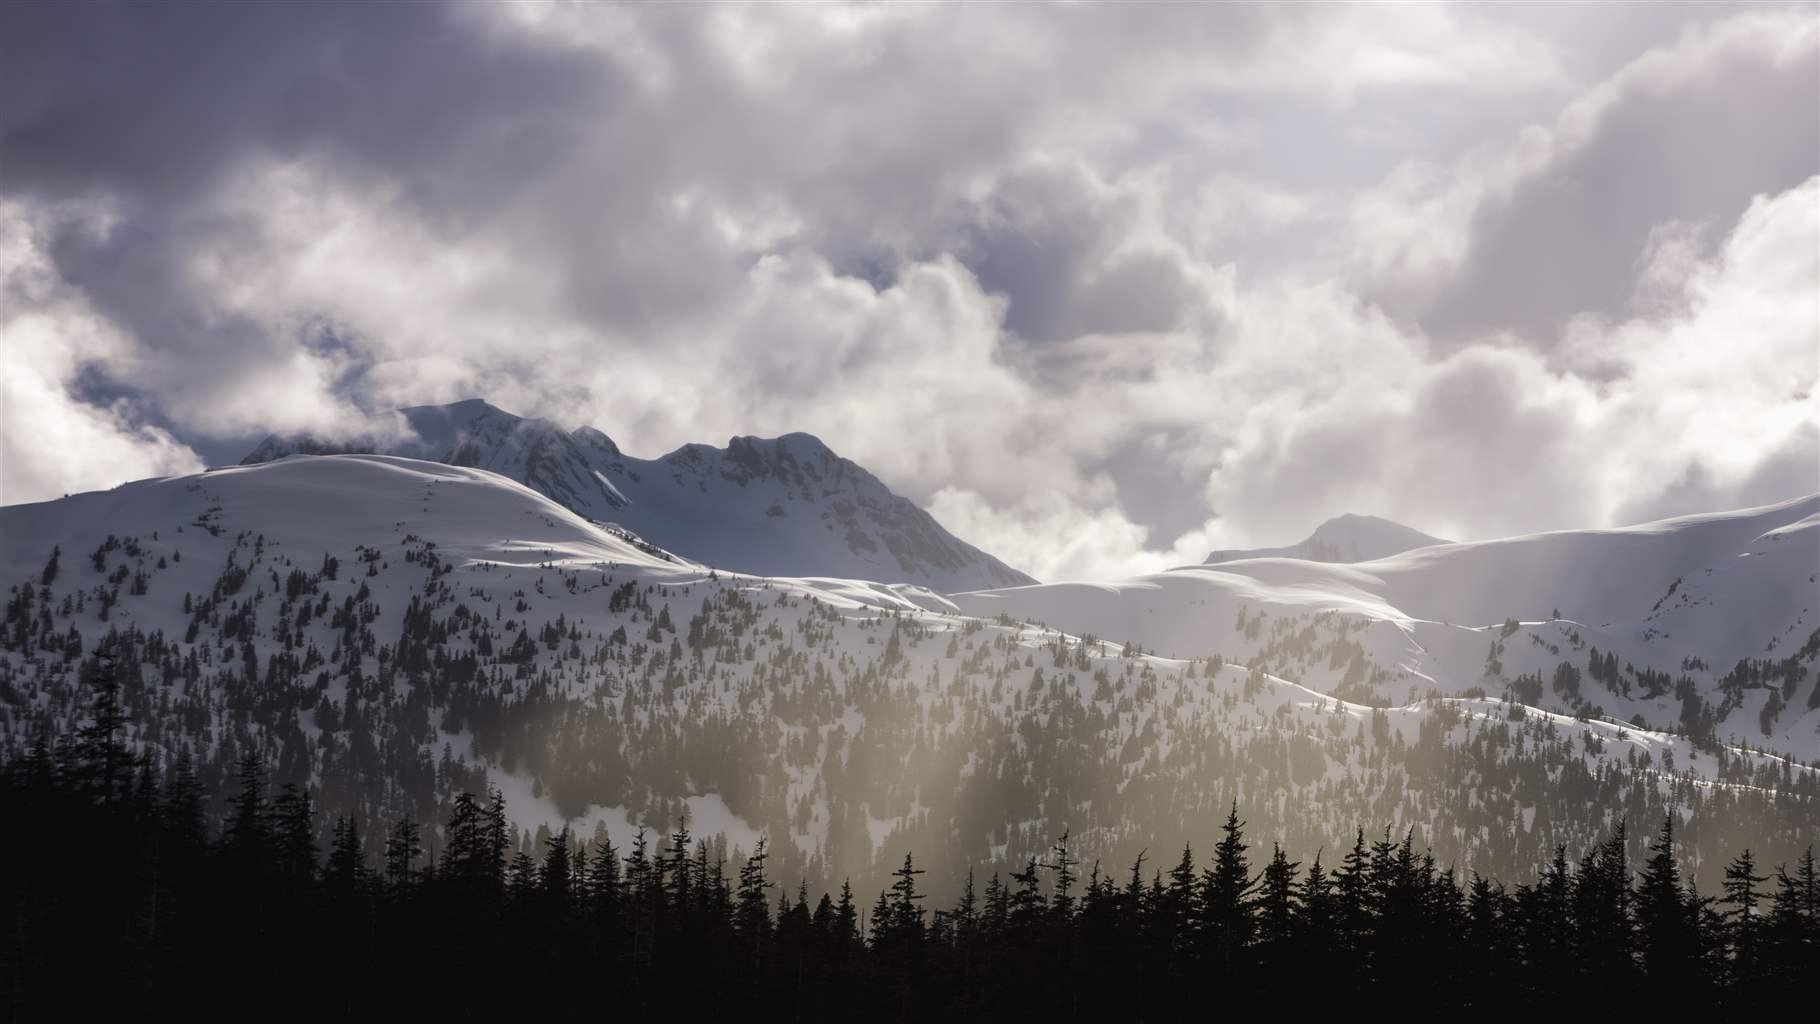 The sun breaks through the clouds over the Chilkat Range in the Tongass National Forest.